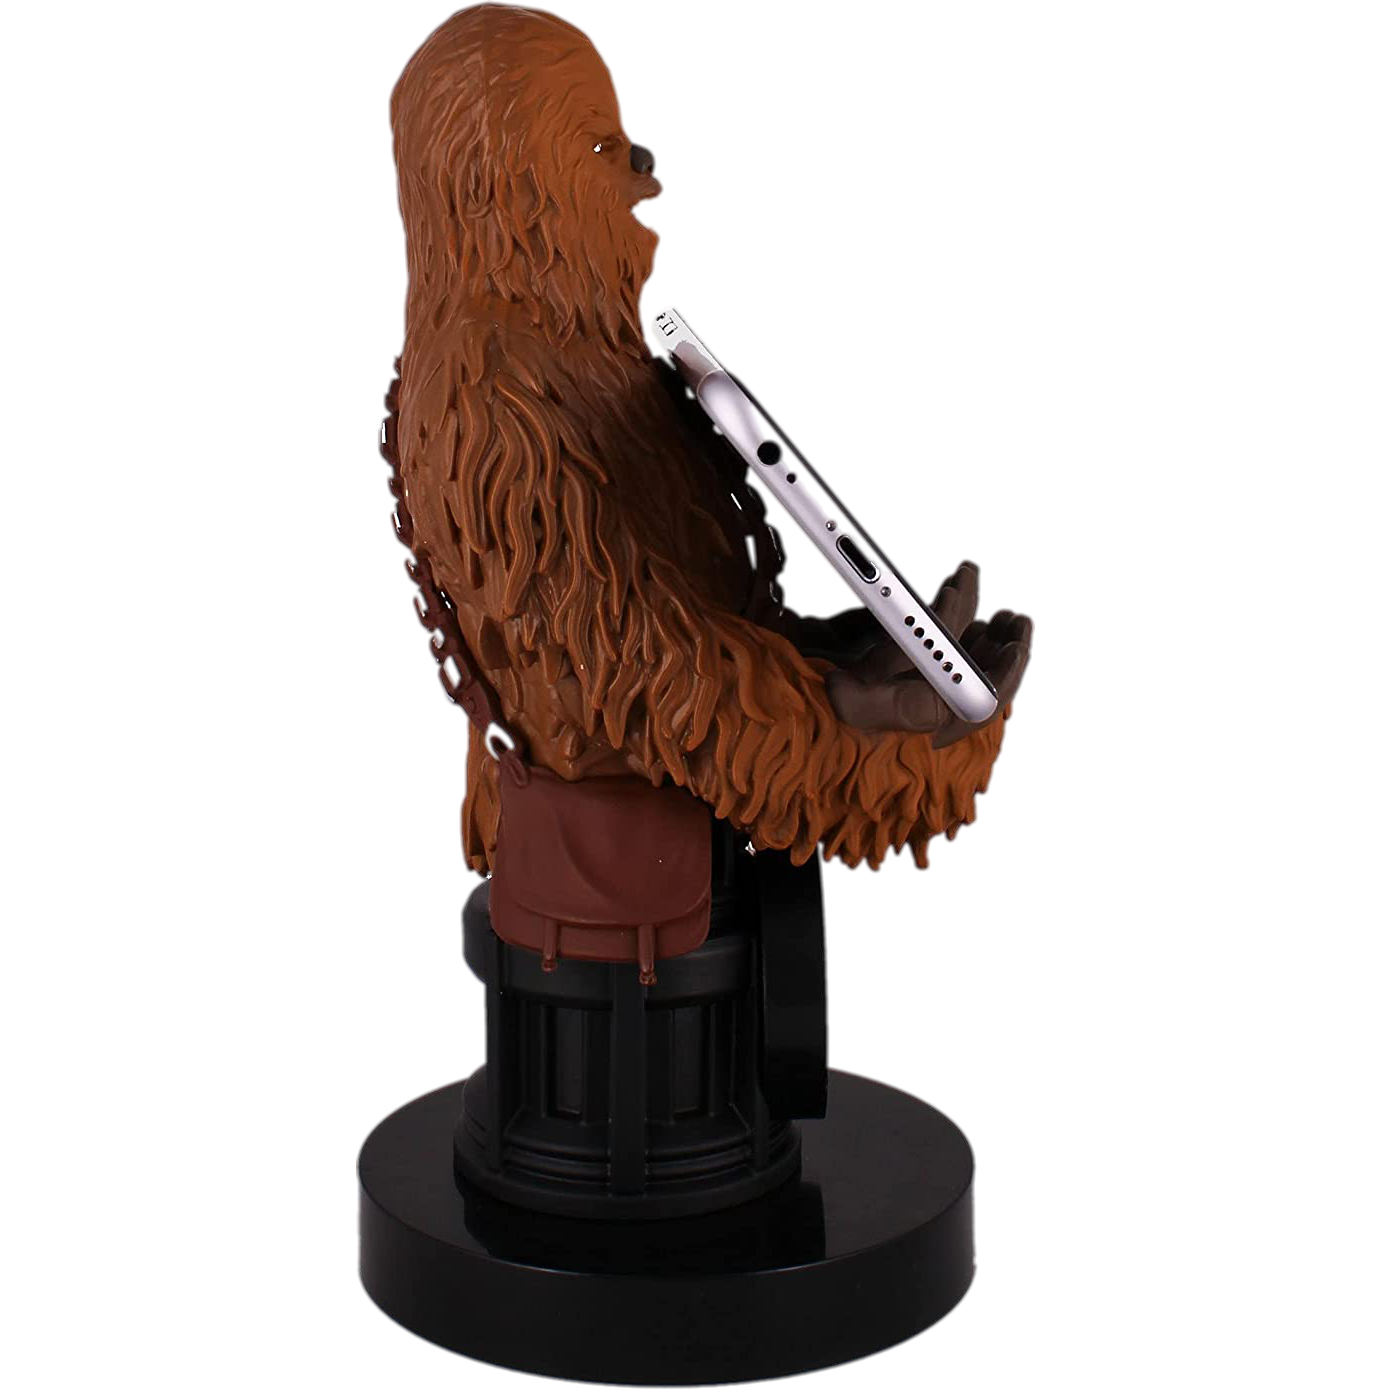 Cable_20Guy_20Chewbacca_20Device_20Holder